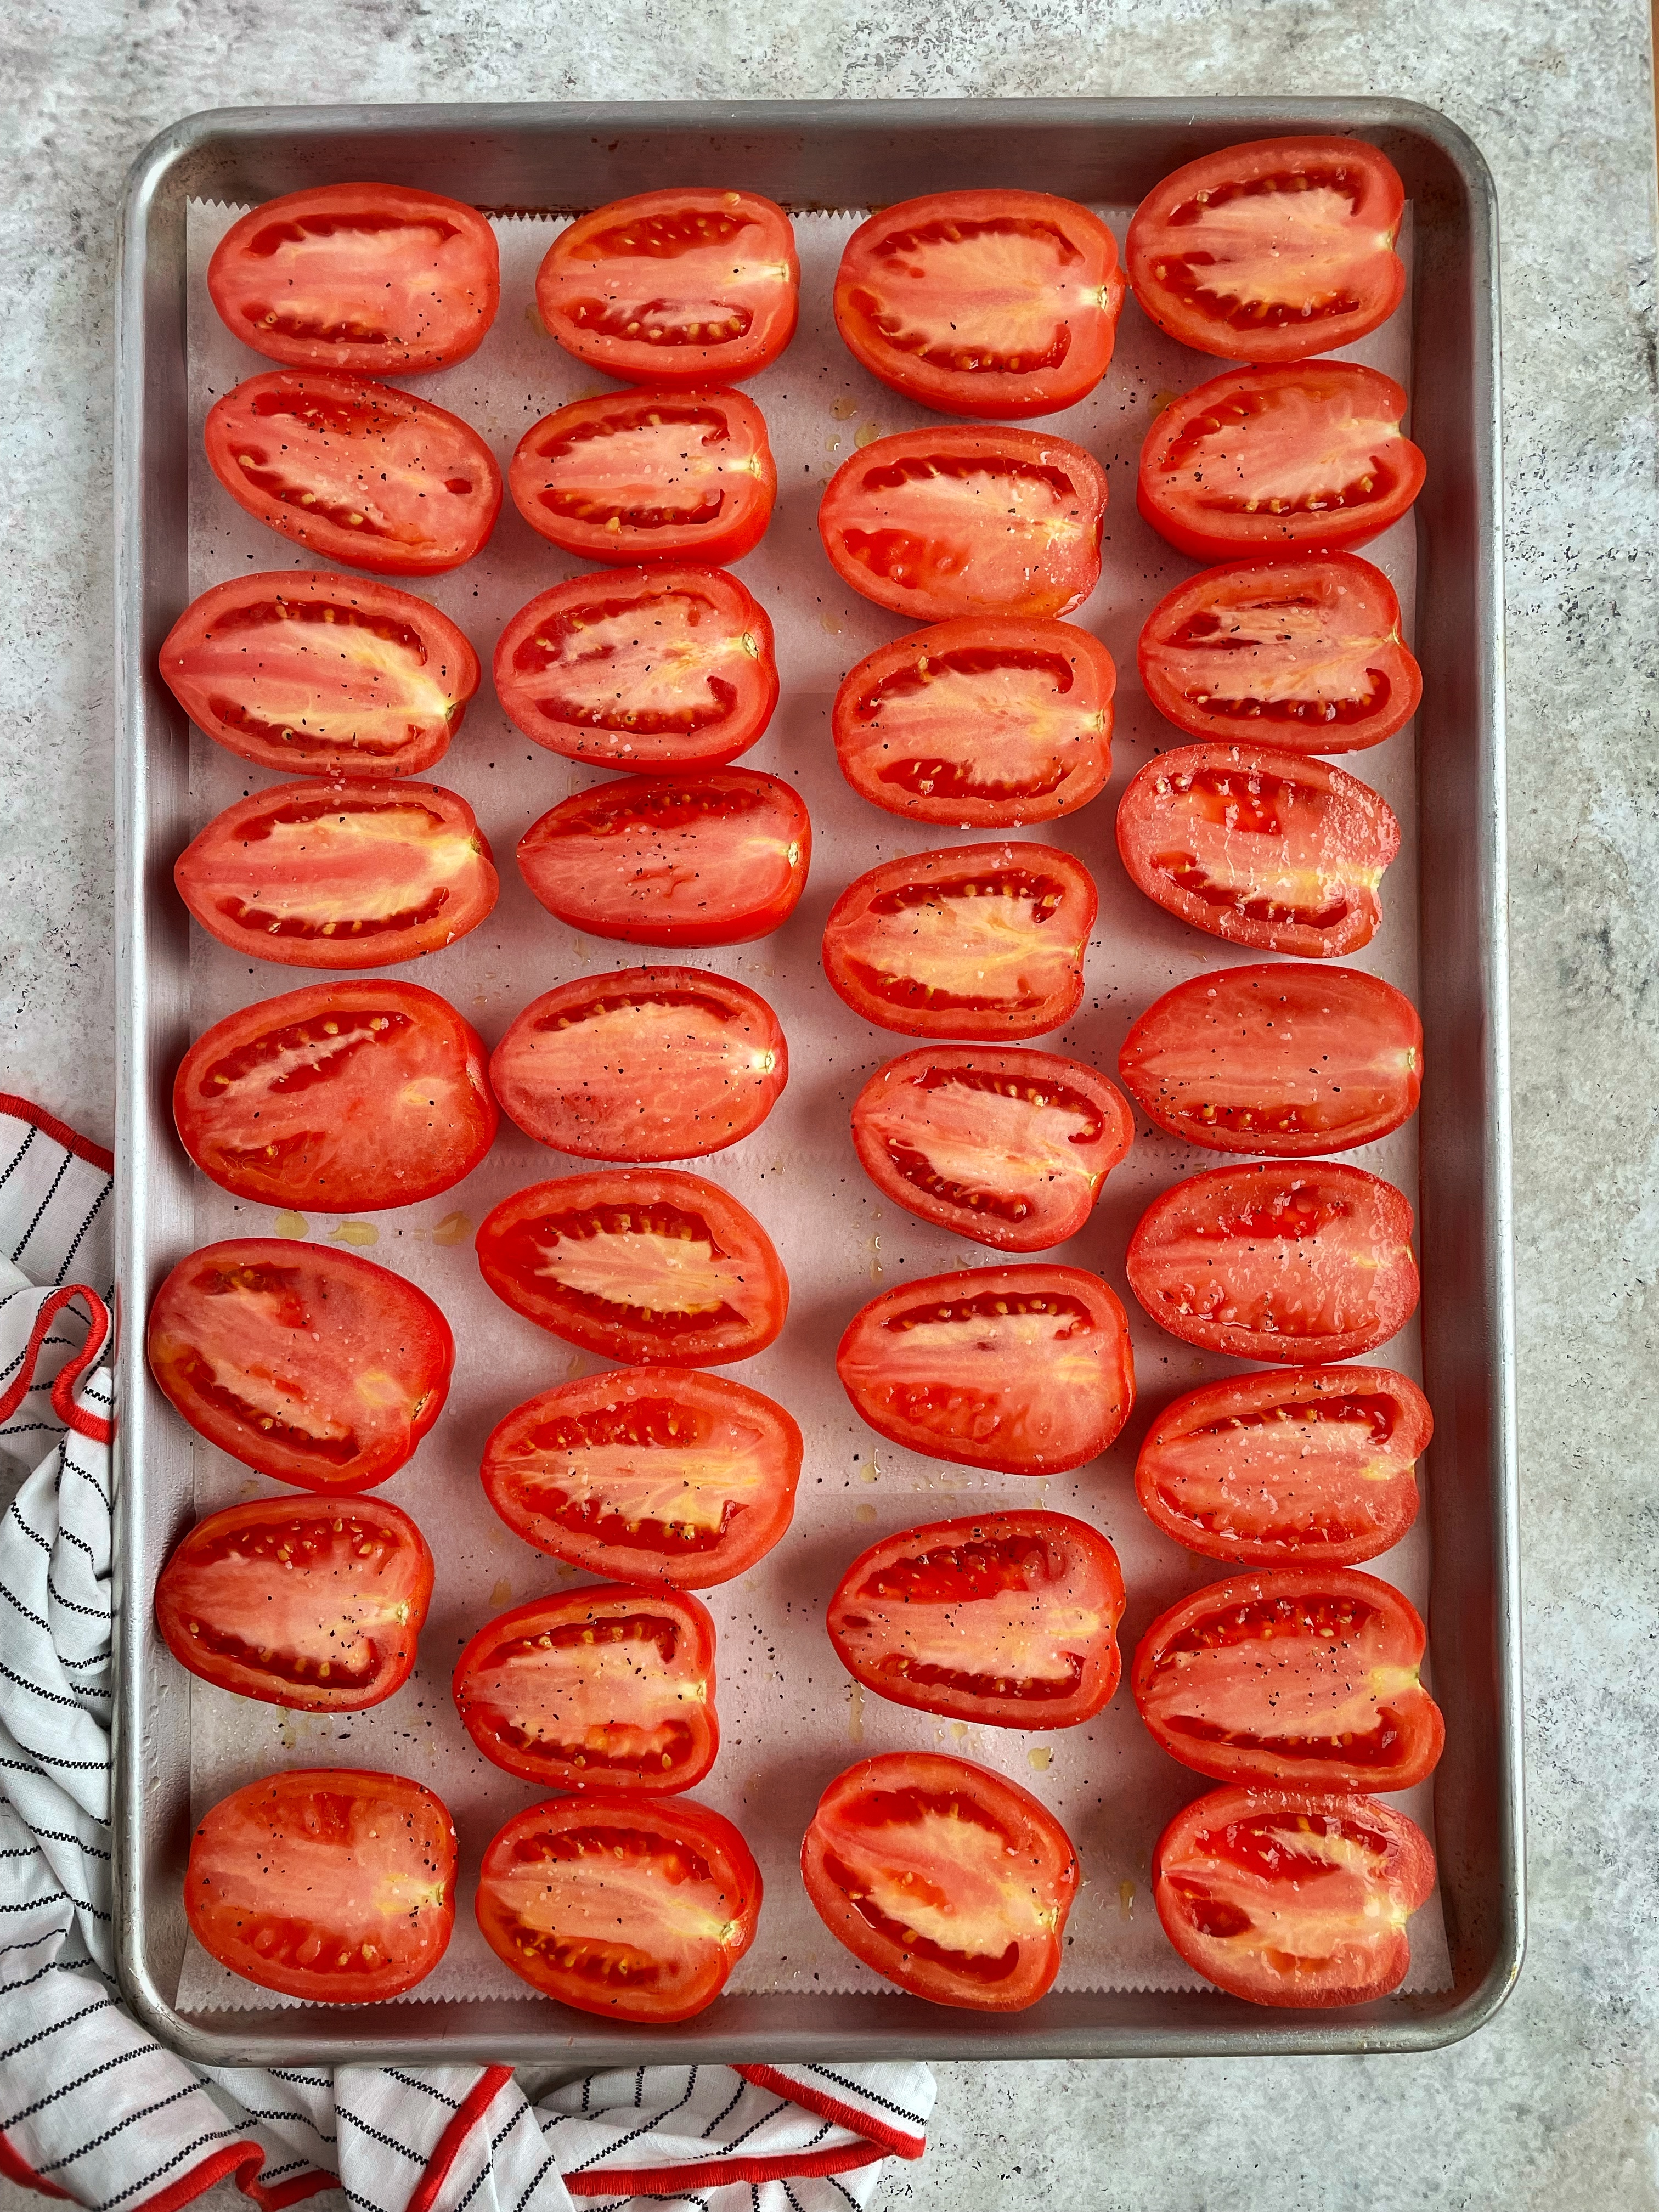 Roma tomatoes prepped and ready for roasting